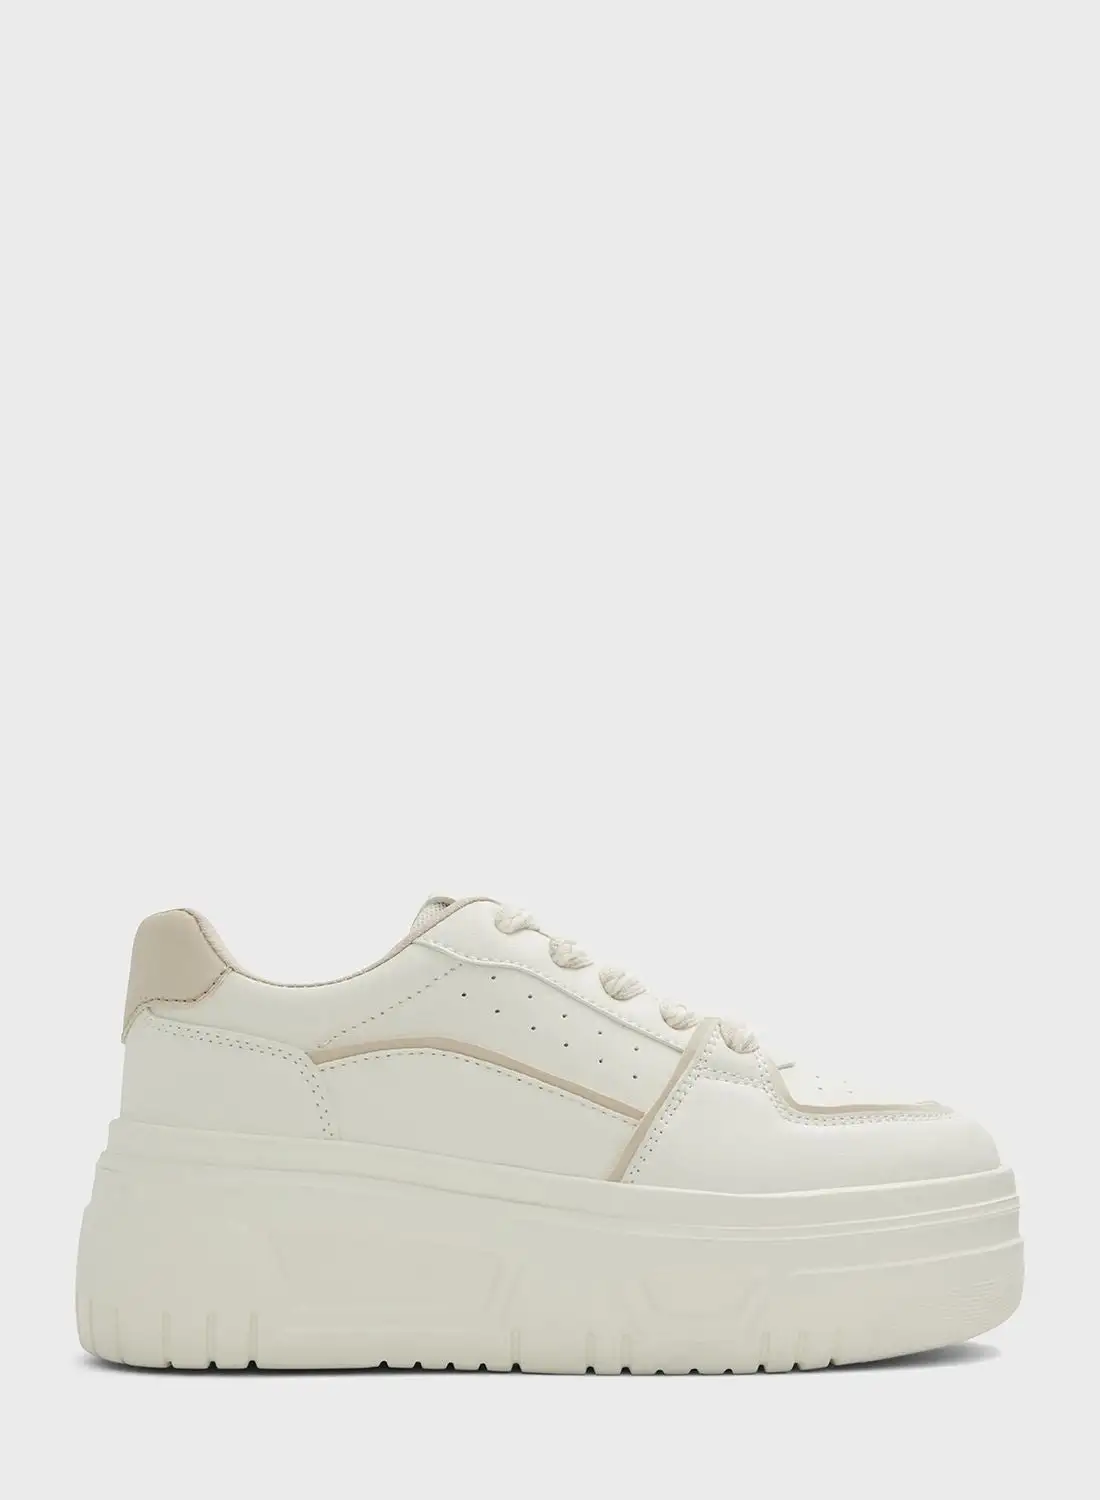 CALL IT SPRING Embery Low-Top Sneakers